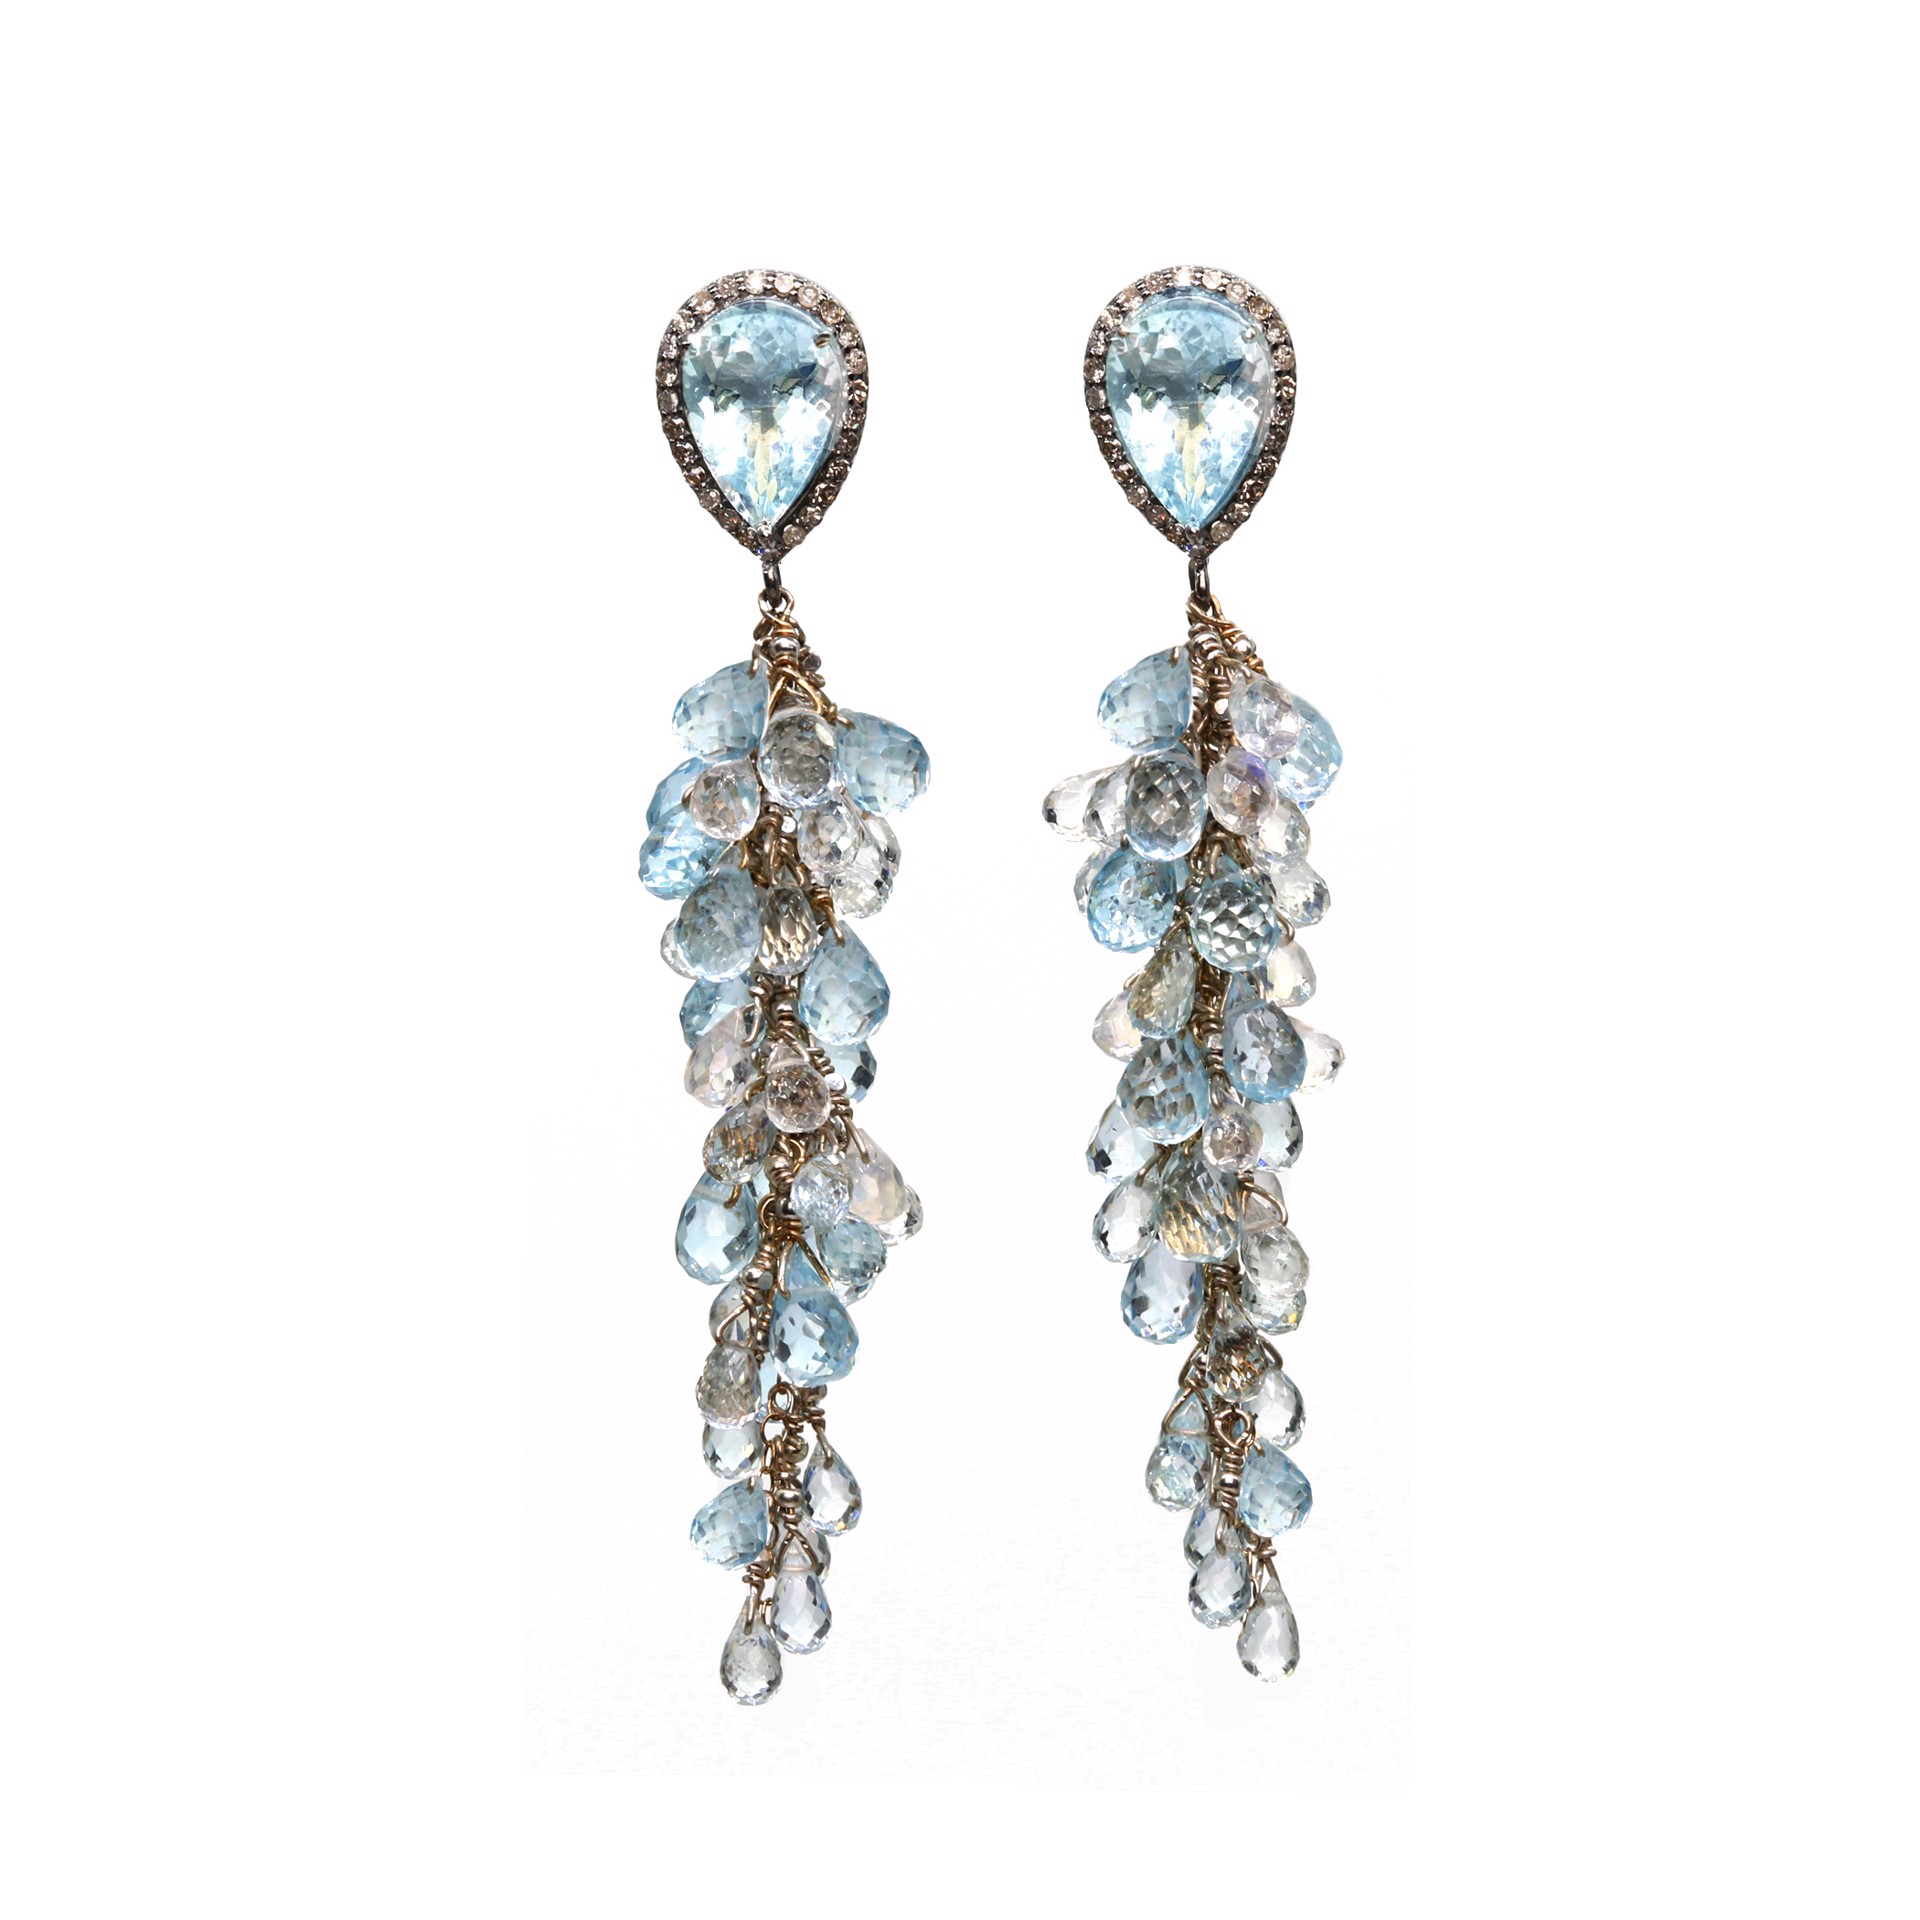 MLJ-3373-E- faceted Aquamarine teardrops surrounded by diamonds posts with hand pinned clusters ofAAA blue topaz and moonstone briolettes in sterling silver by Melinda Lawton Jewelry